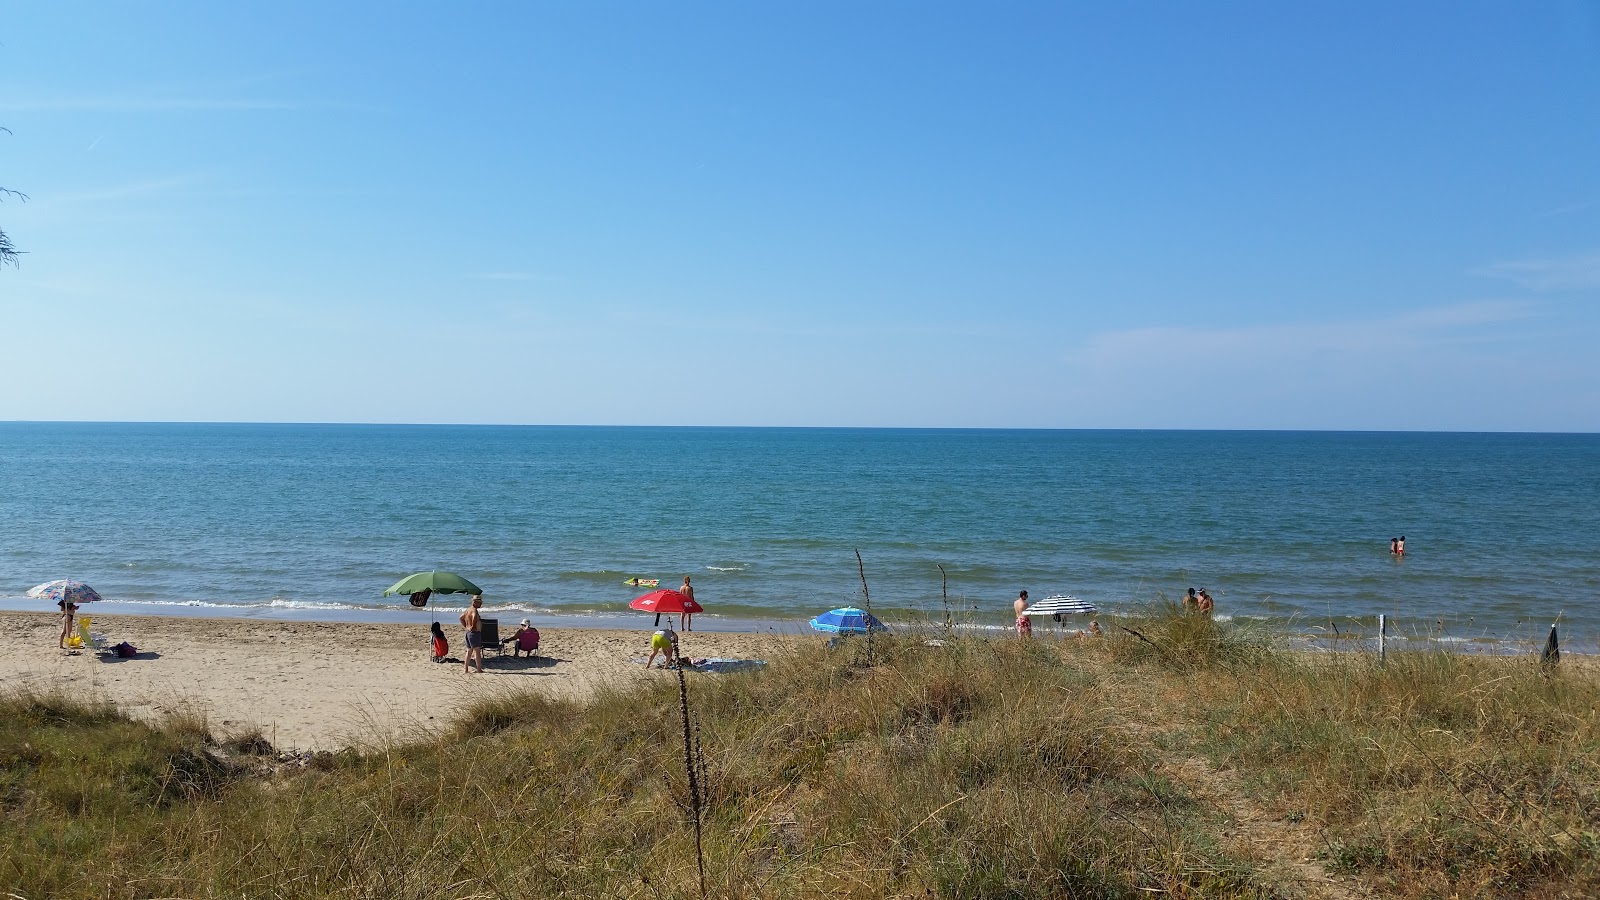 Photo of Spiaggia di Foce Varano - popular place among relax connoisseurs